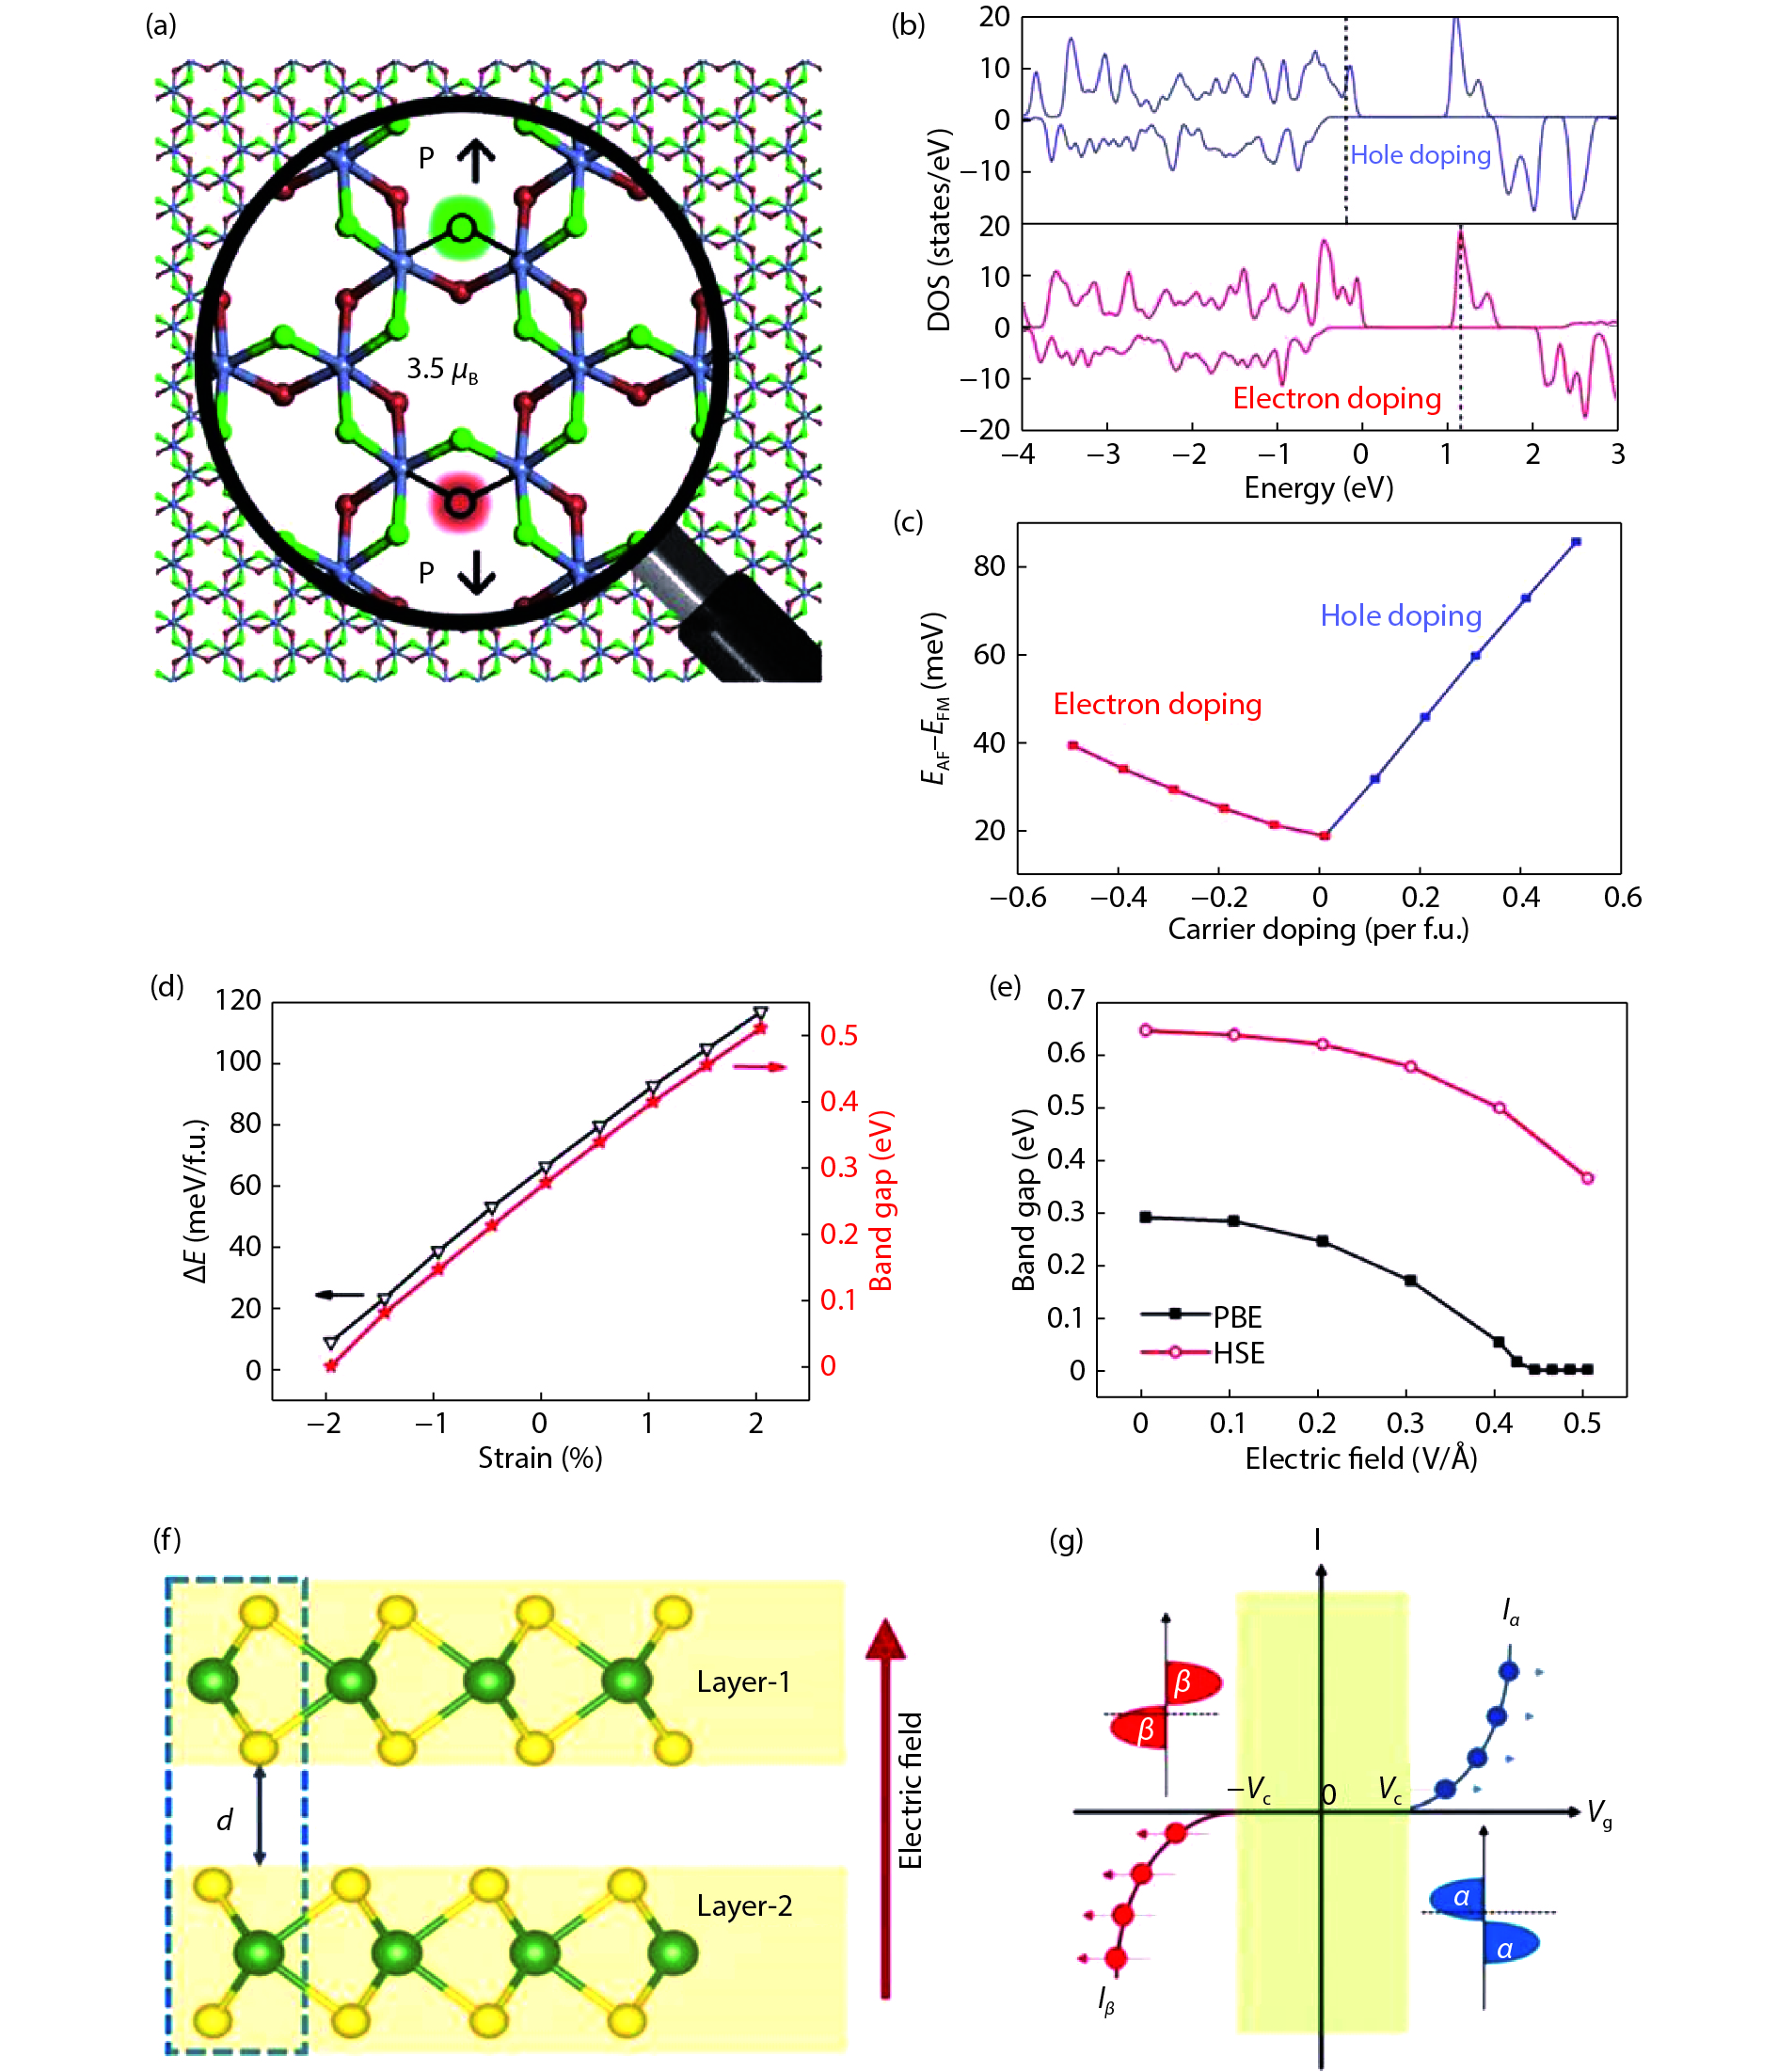 (Color online) (a) The I-vacancies models of monolayer CrI3. Reprinted with permission from Ref. [35]. Copyright 2018, American Chemical Society. (b) The DOS of CrI3 monolayer doped with 0.5 hole or 0.5 electron, and (c) Relationship between ferromagnetic stability and carrier doping concentration. The dashed vertical lines in (b) refer to the shifting Fermi level[36]. (d) The strain engineering of monolayer Cr2Ge2Te6 shows that the bandgaps vary with the increase of biaxial strain for the FM state (the red line), and the black line represents the variety of total energy difference between the AFM and FM configurations with the strain in the monolayer Cr2Ge2Te6. (e) The dependence of PBE and HSE06 bandgaps under a perpendicular electric field with different field strengths. Reprinted with permission from Ref. [17]. Copyright 2019, AIP Publishing. (f) The side view of the bilayer 2H-VSe2, with the electric field applied perpendicularly from layer 2 to layer 1. (g) The schematic spin-polarized current versus the gate voltage, with Vc indicating the critical voltage. The switching of the spin-ɑ current Iɑ and spin-β current Iβ can be manipulated by the gate voltage. Reprinted with permission from Ref. [37]. Copyright 2017, National Academy of Sciences.